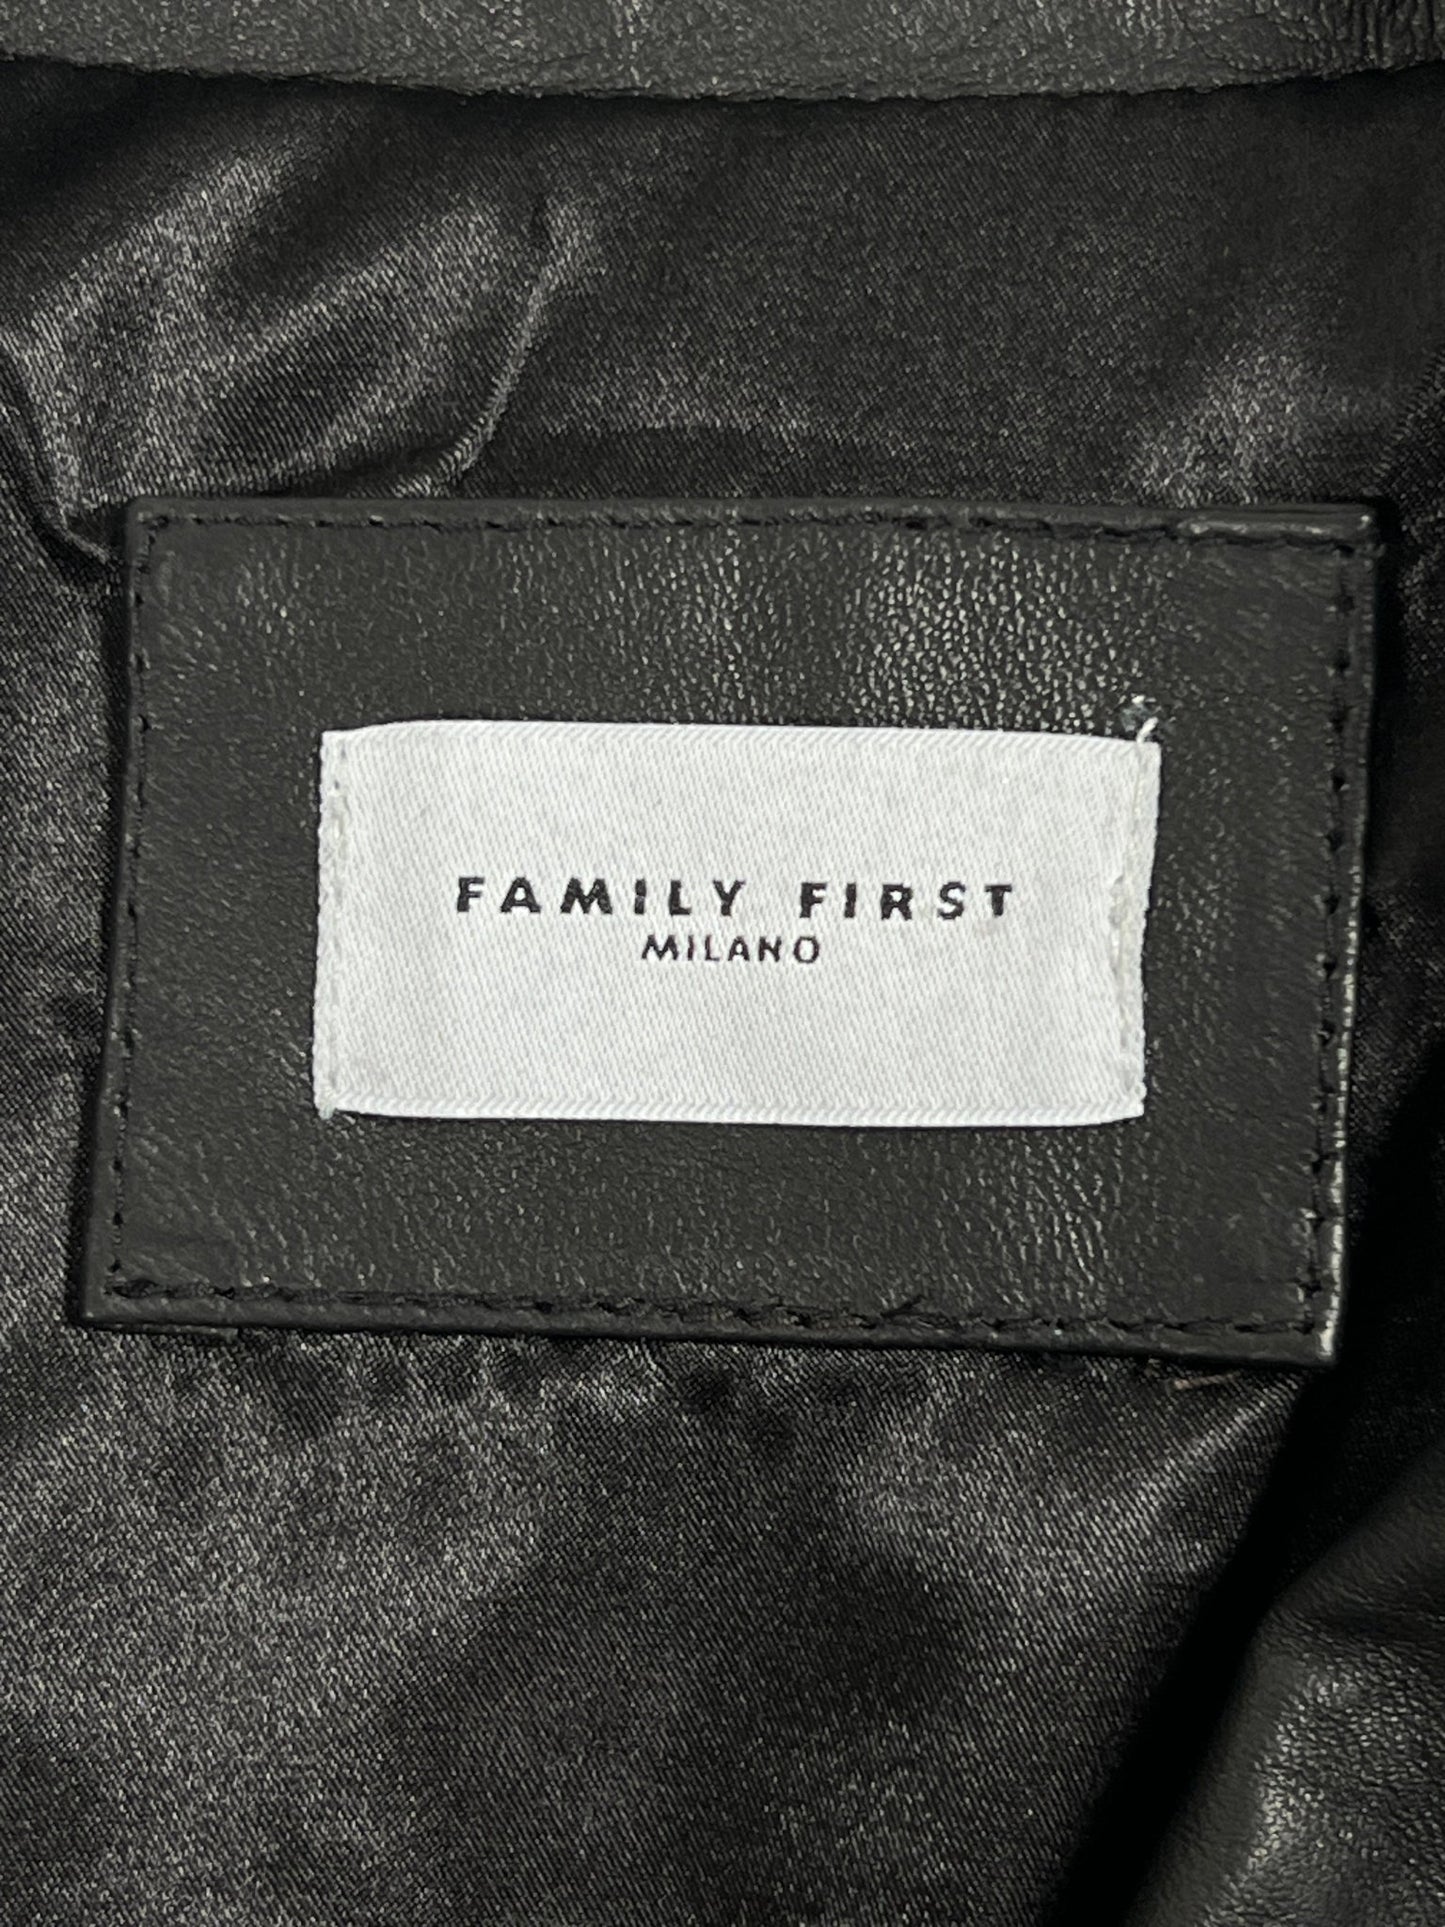 A black vegan leather biker jacket from FAMILY FIRST with a label that says family first.